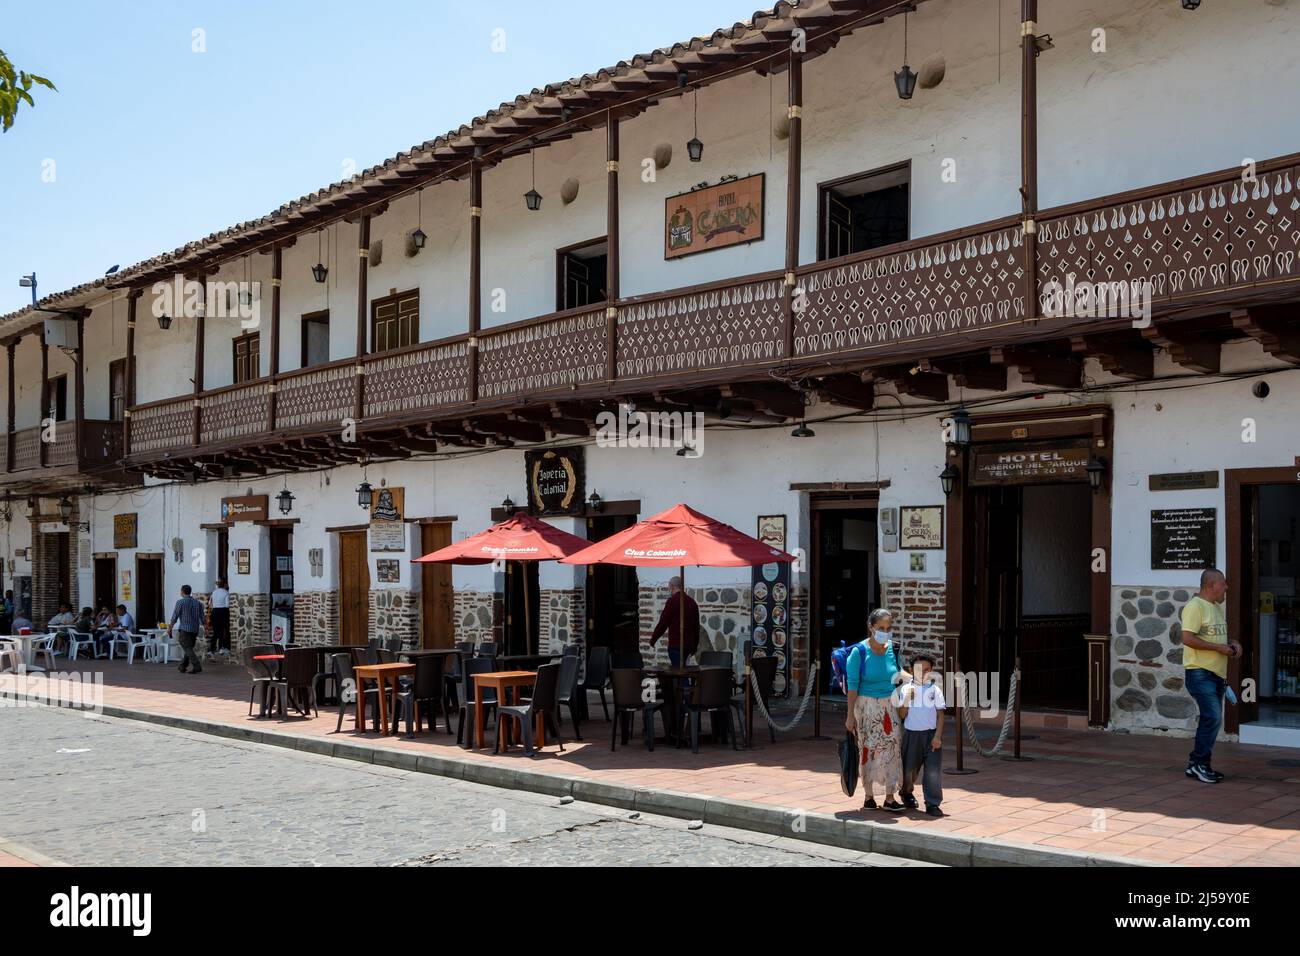 People gather at town center of Santa Fe de Antioquia, Colombia, South America. Stock Photo